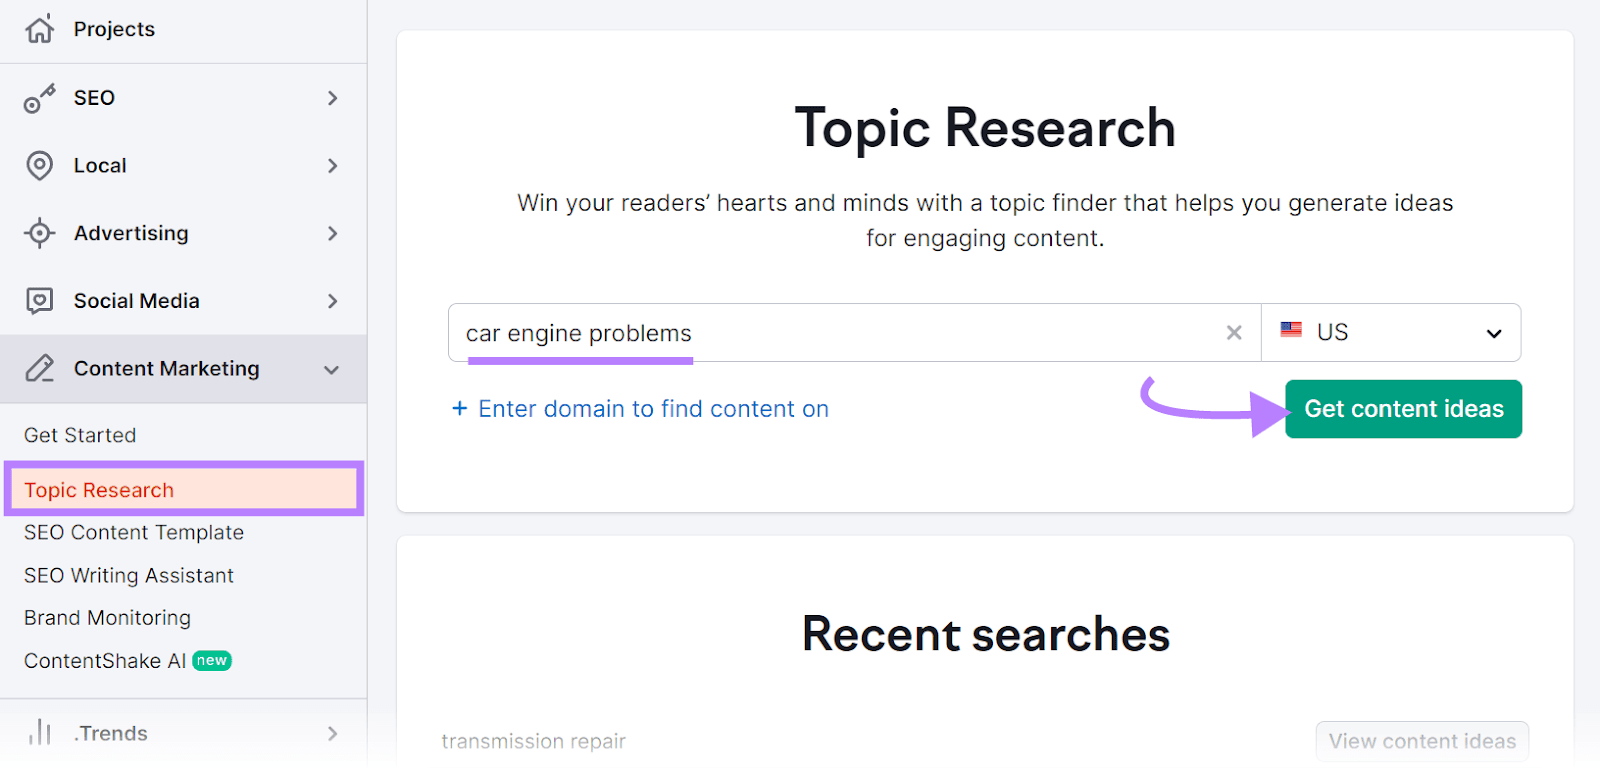 "car engine problems" keyword entered into the Topic Research tool search bar